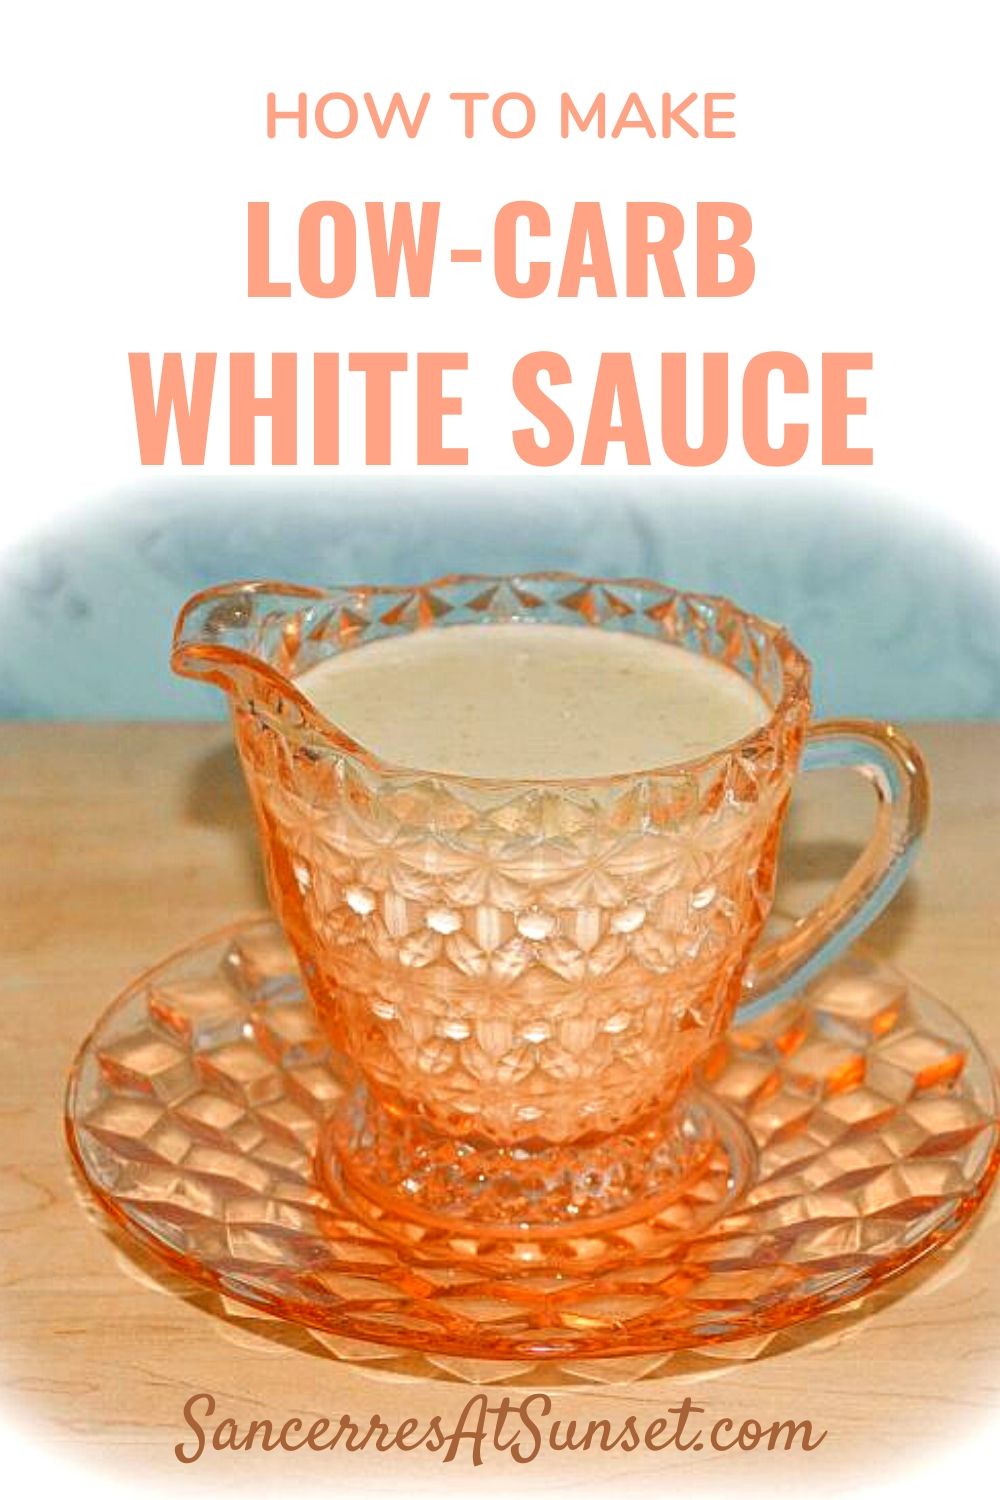 How to Make Low-Carb White Sauce